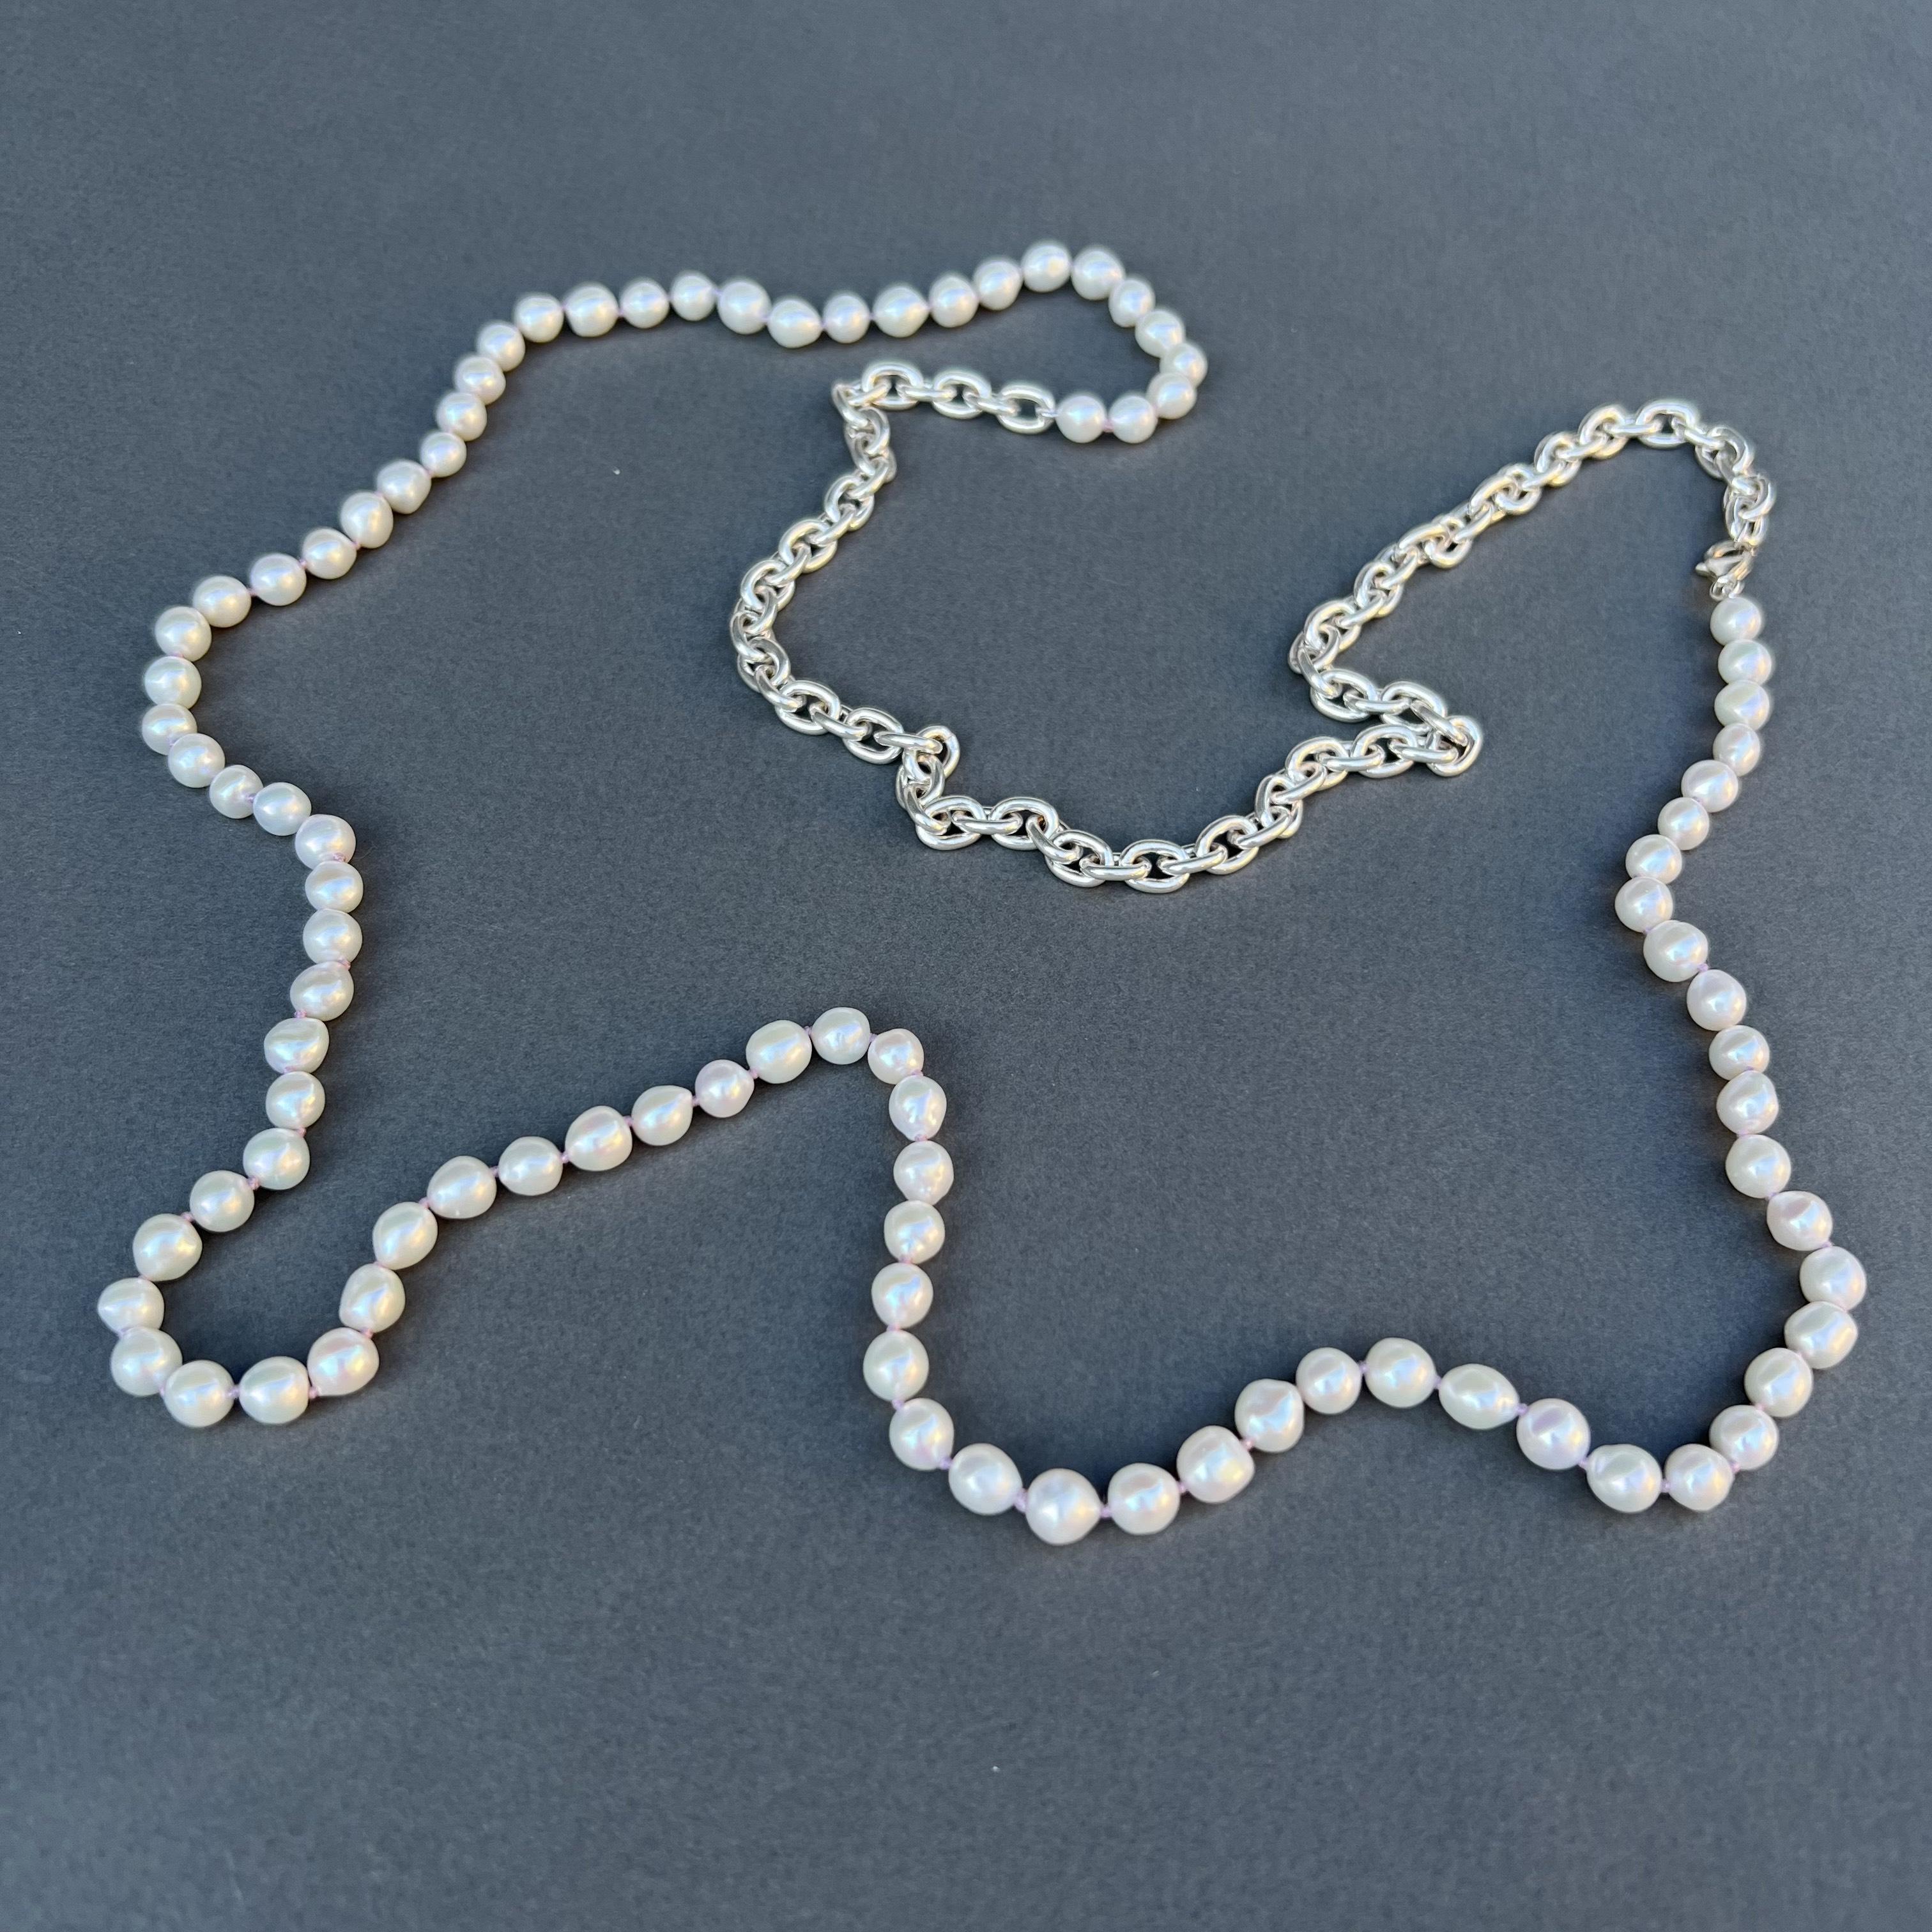 Round Cut White Pearl Silver Chain Necklace J Dauphin For Sale